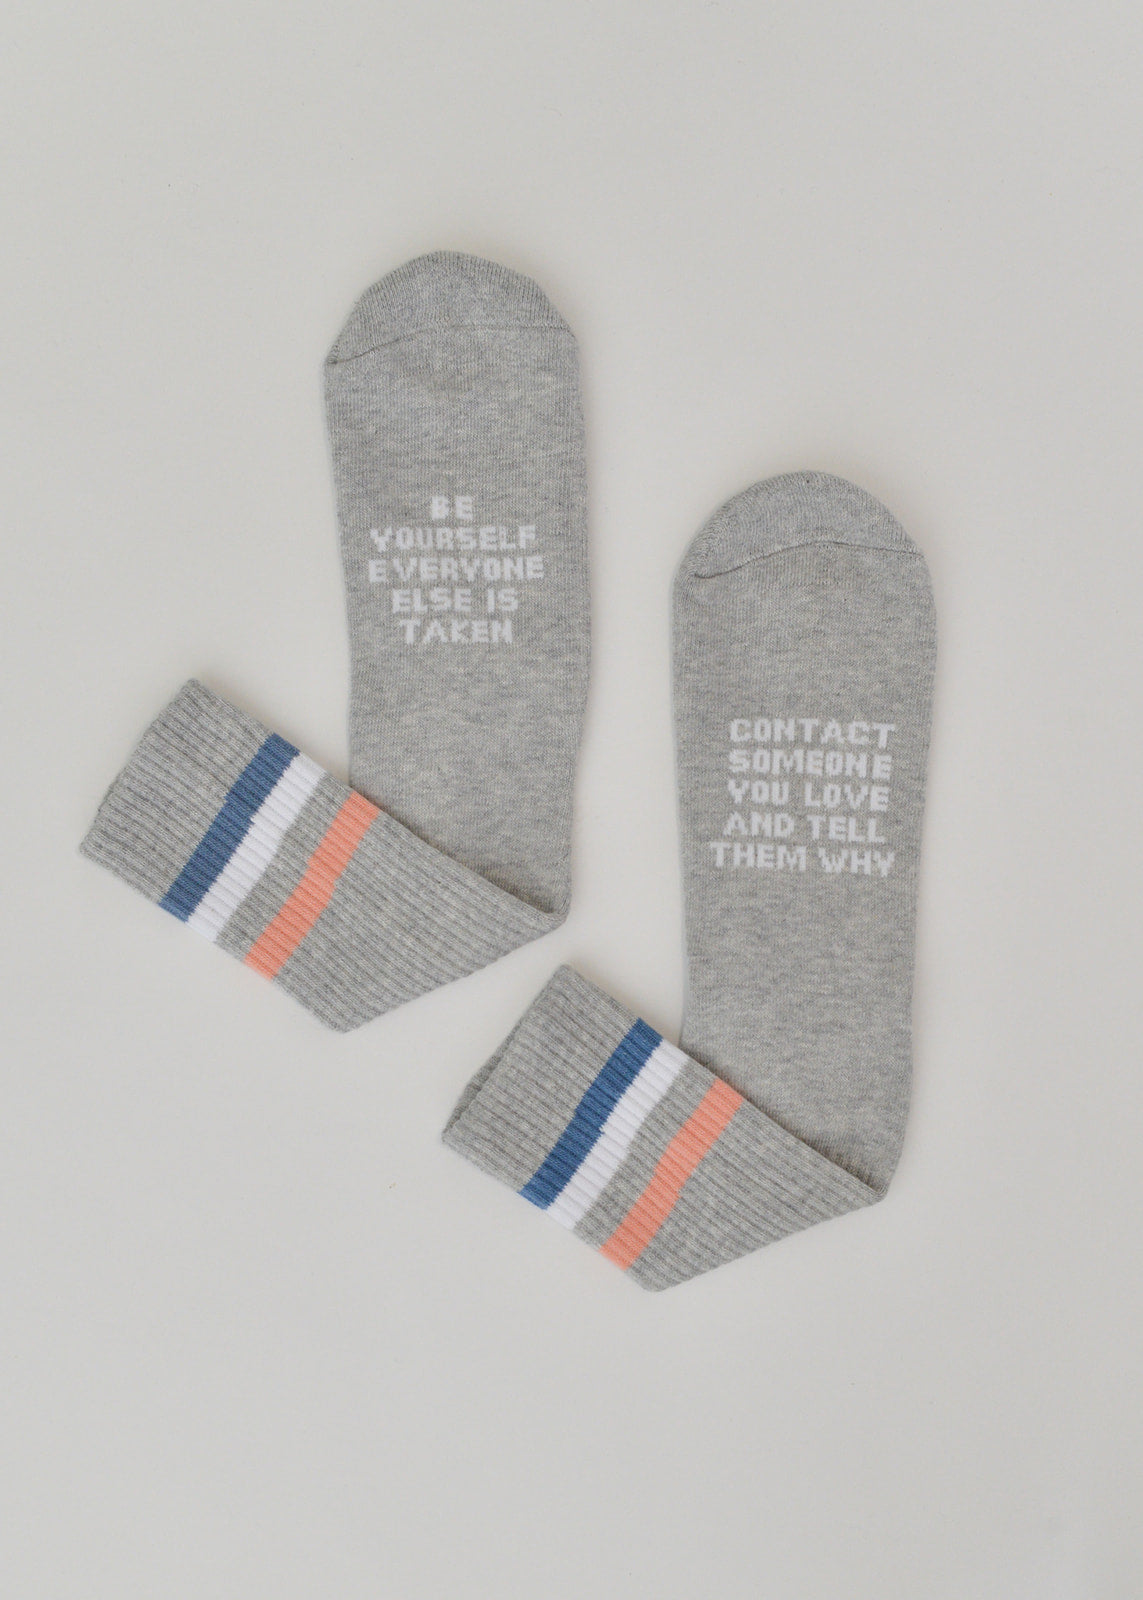 Men's Freedom crew sock with positive affirmations